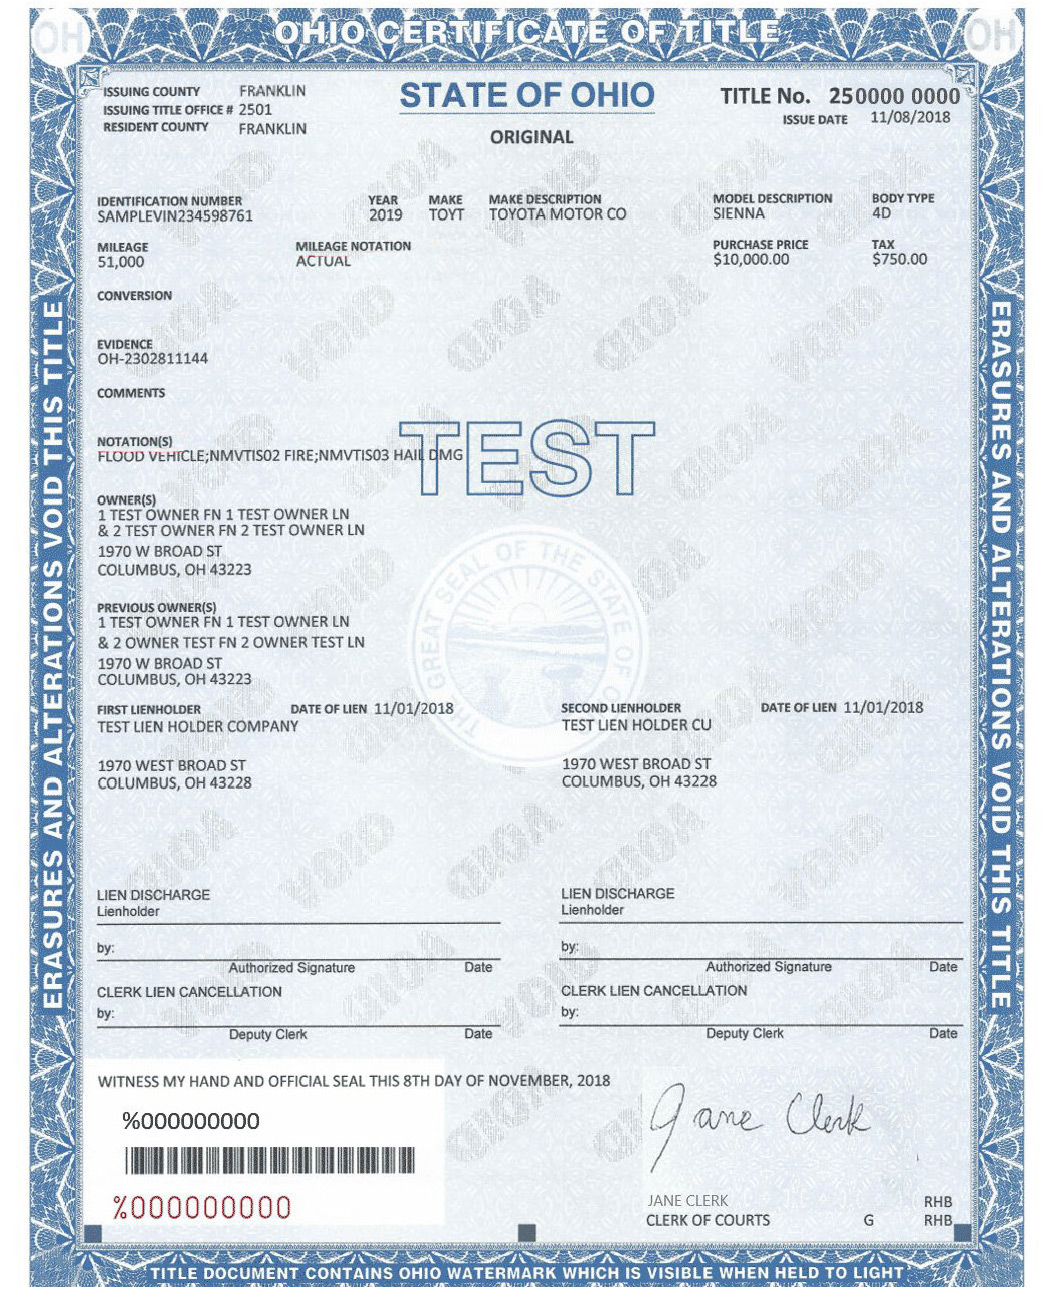 Front of Ohio Certificate of Title